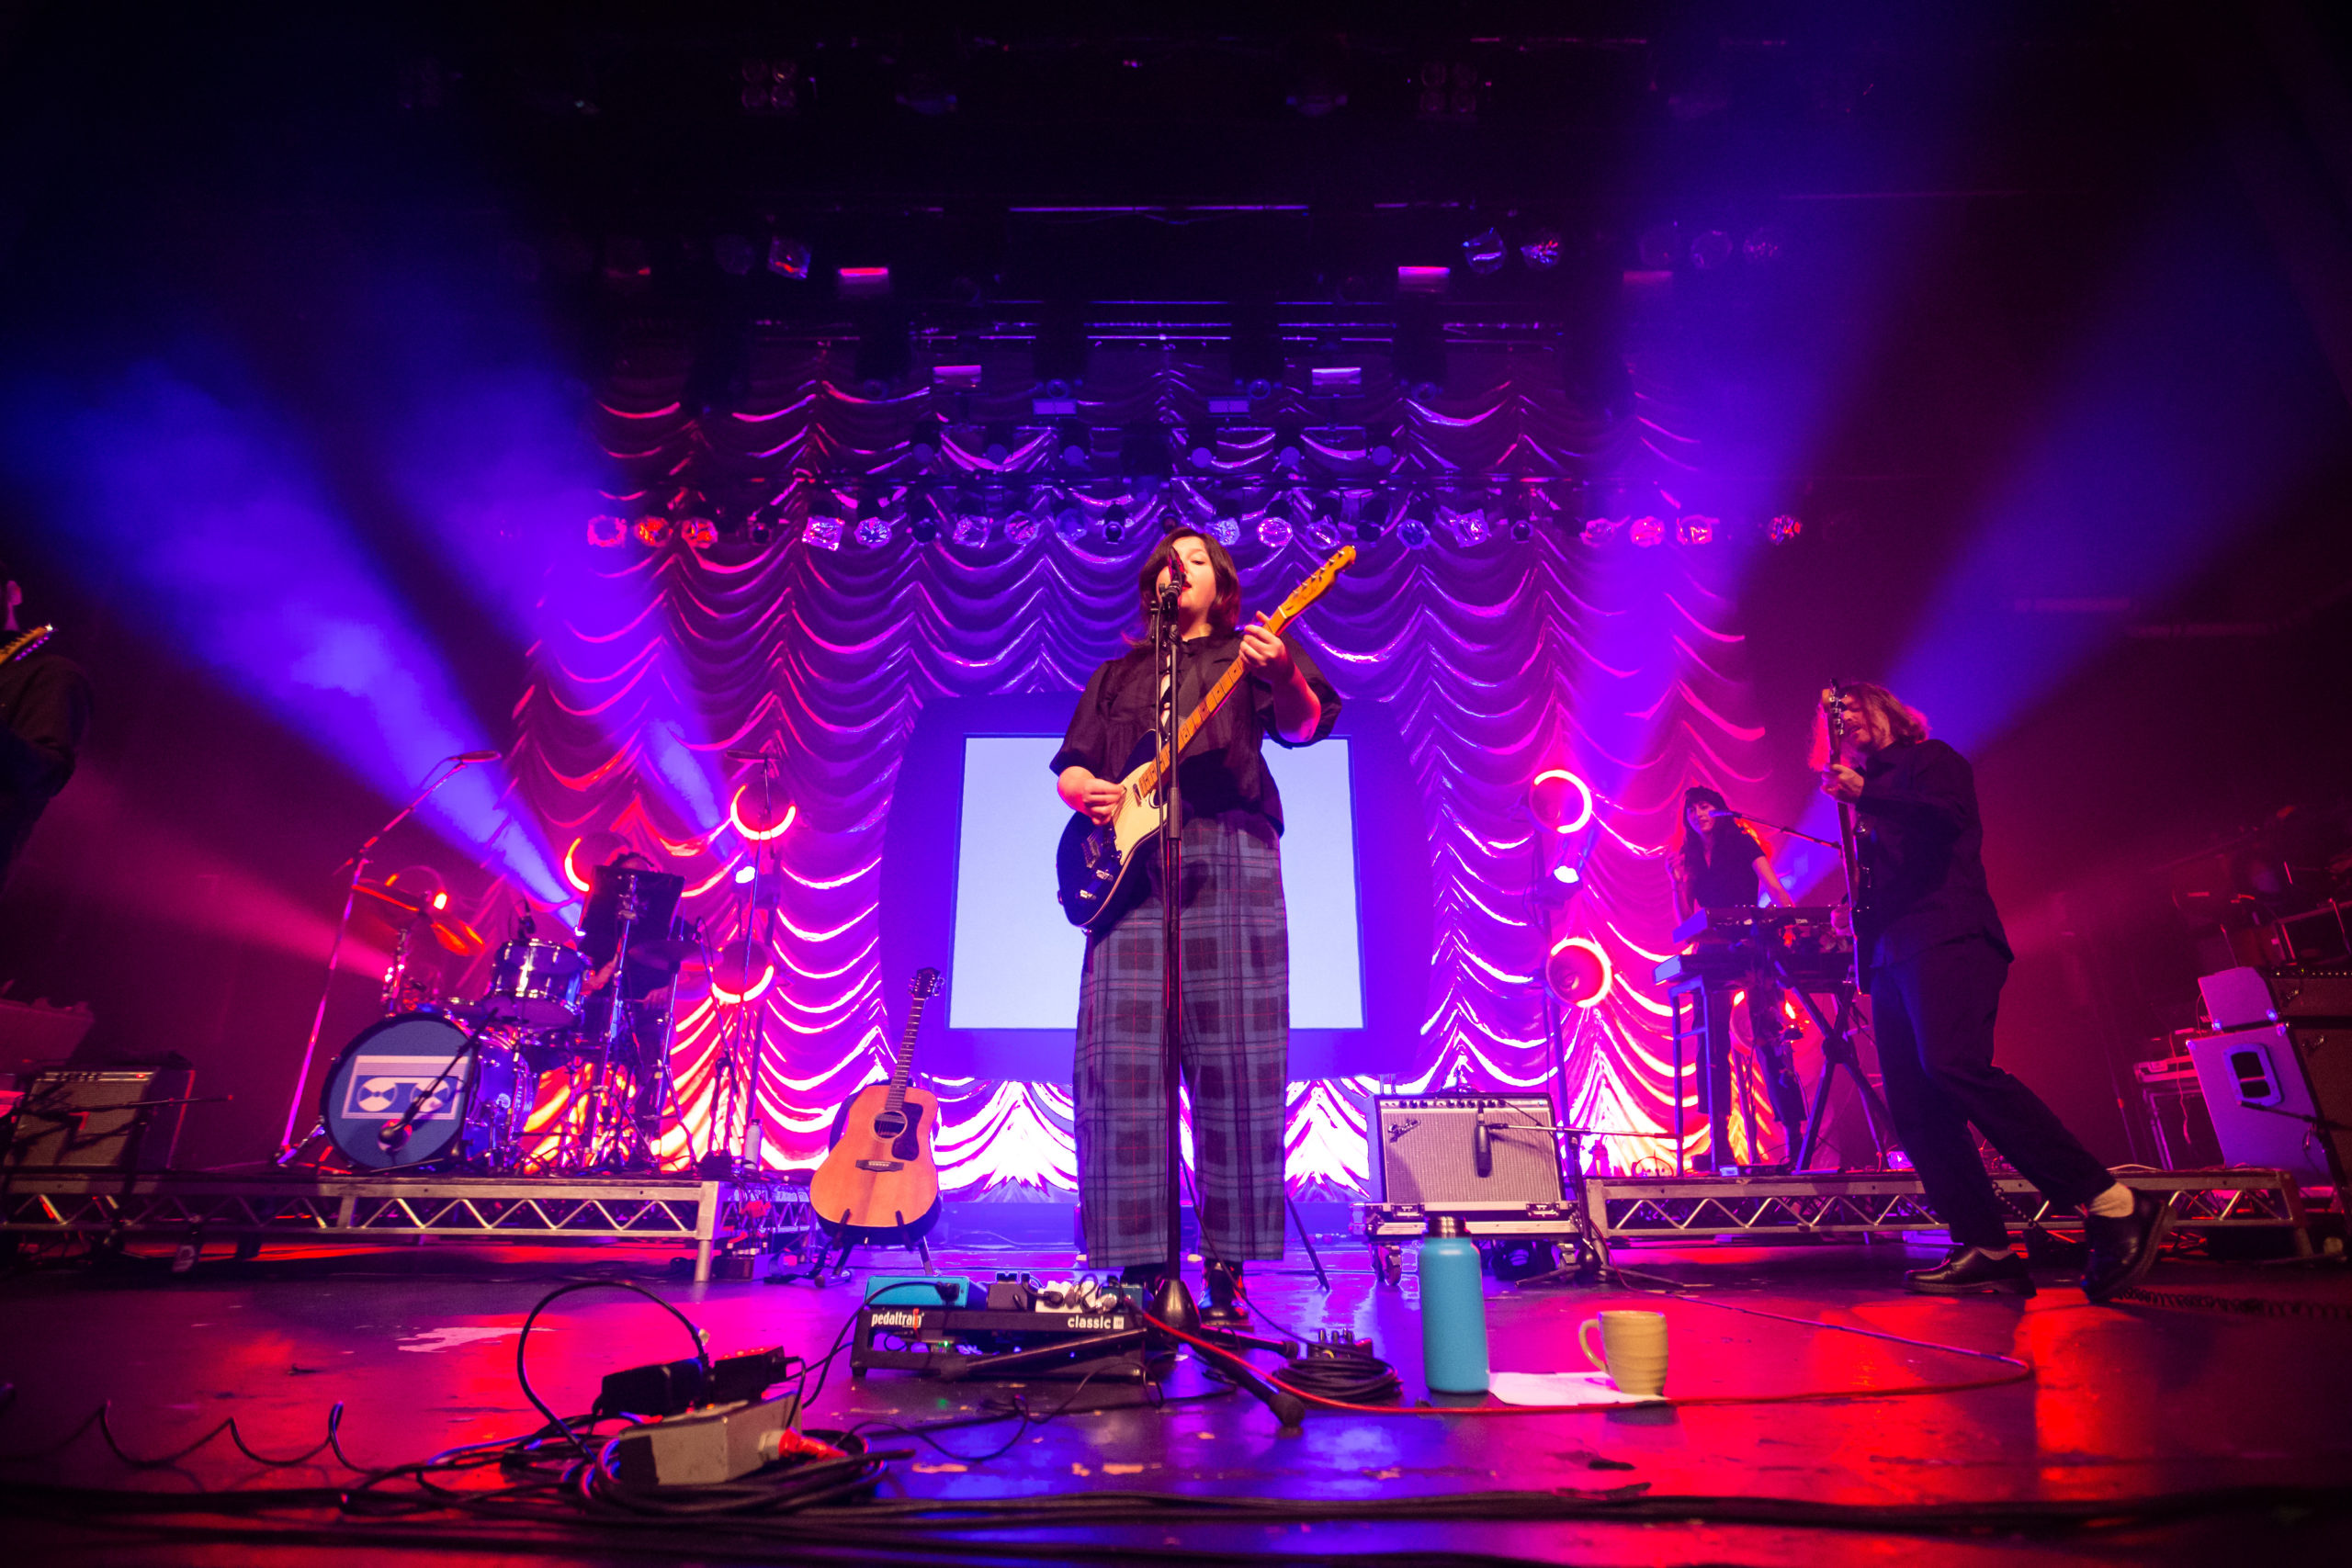 Lights cascade outward behind Lucy Dacus on the stage of the Vogue Theatre